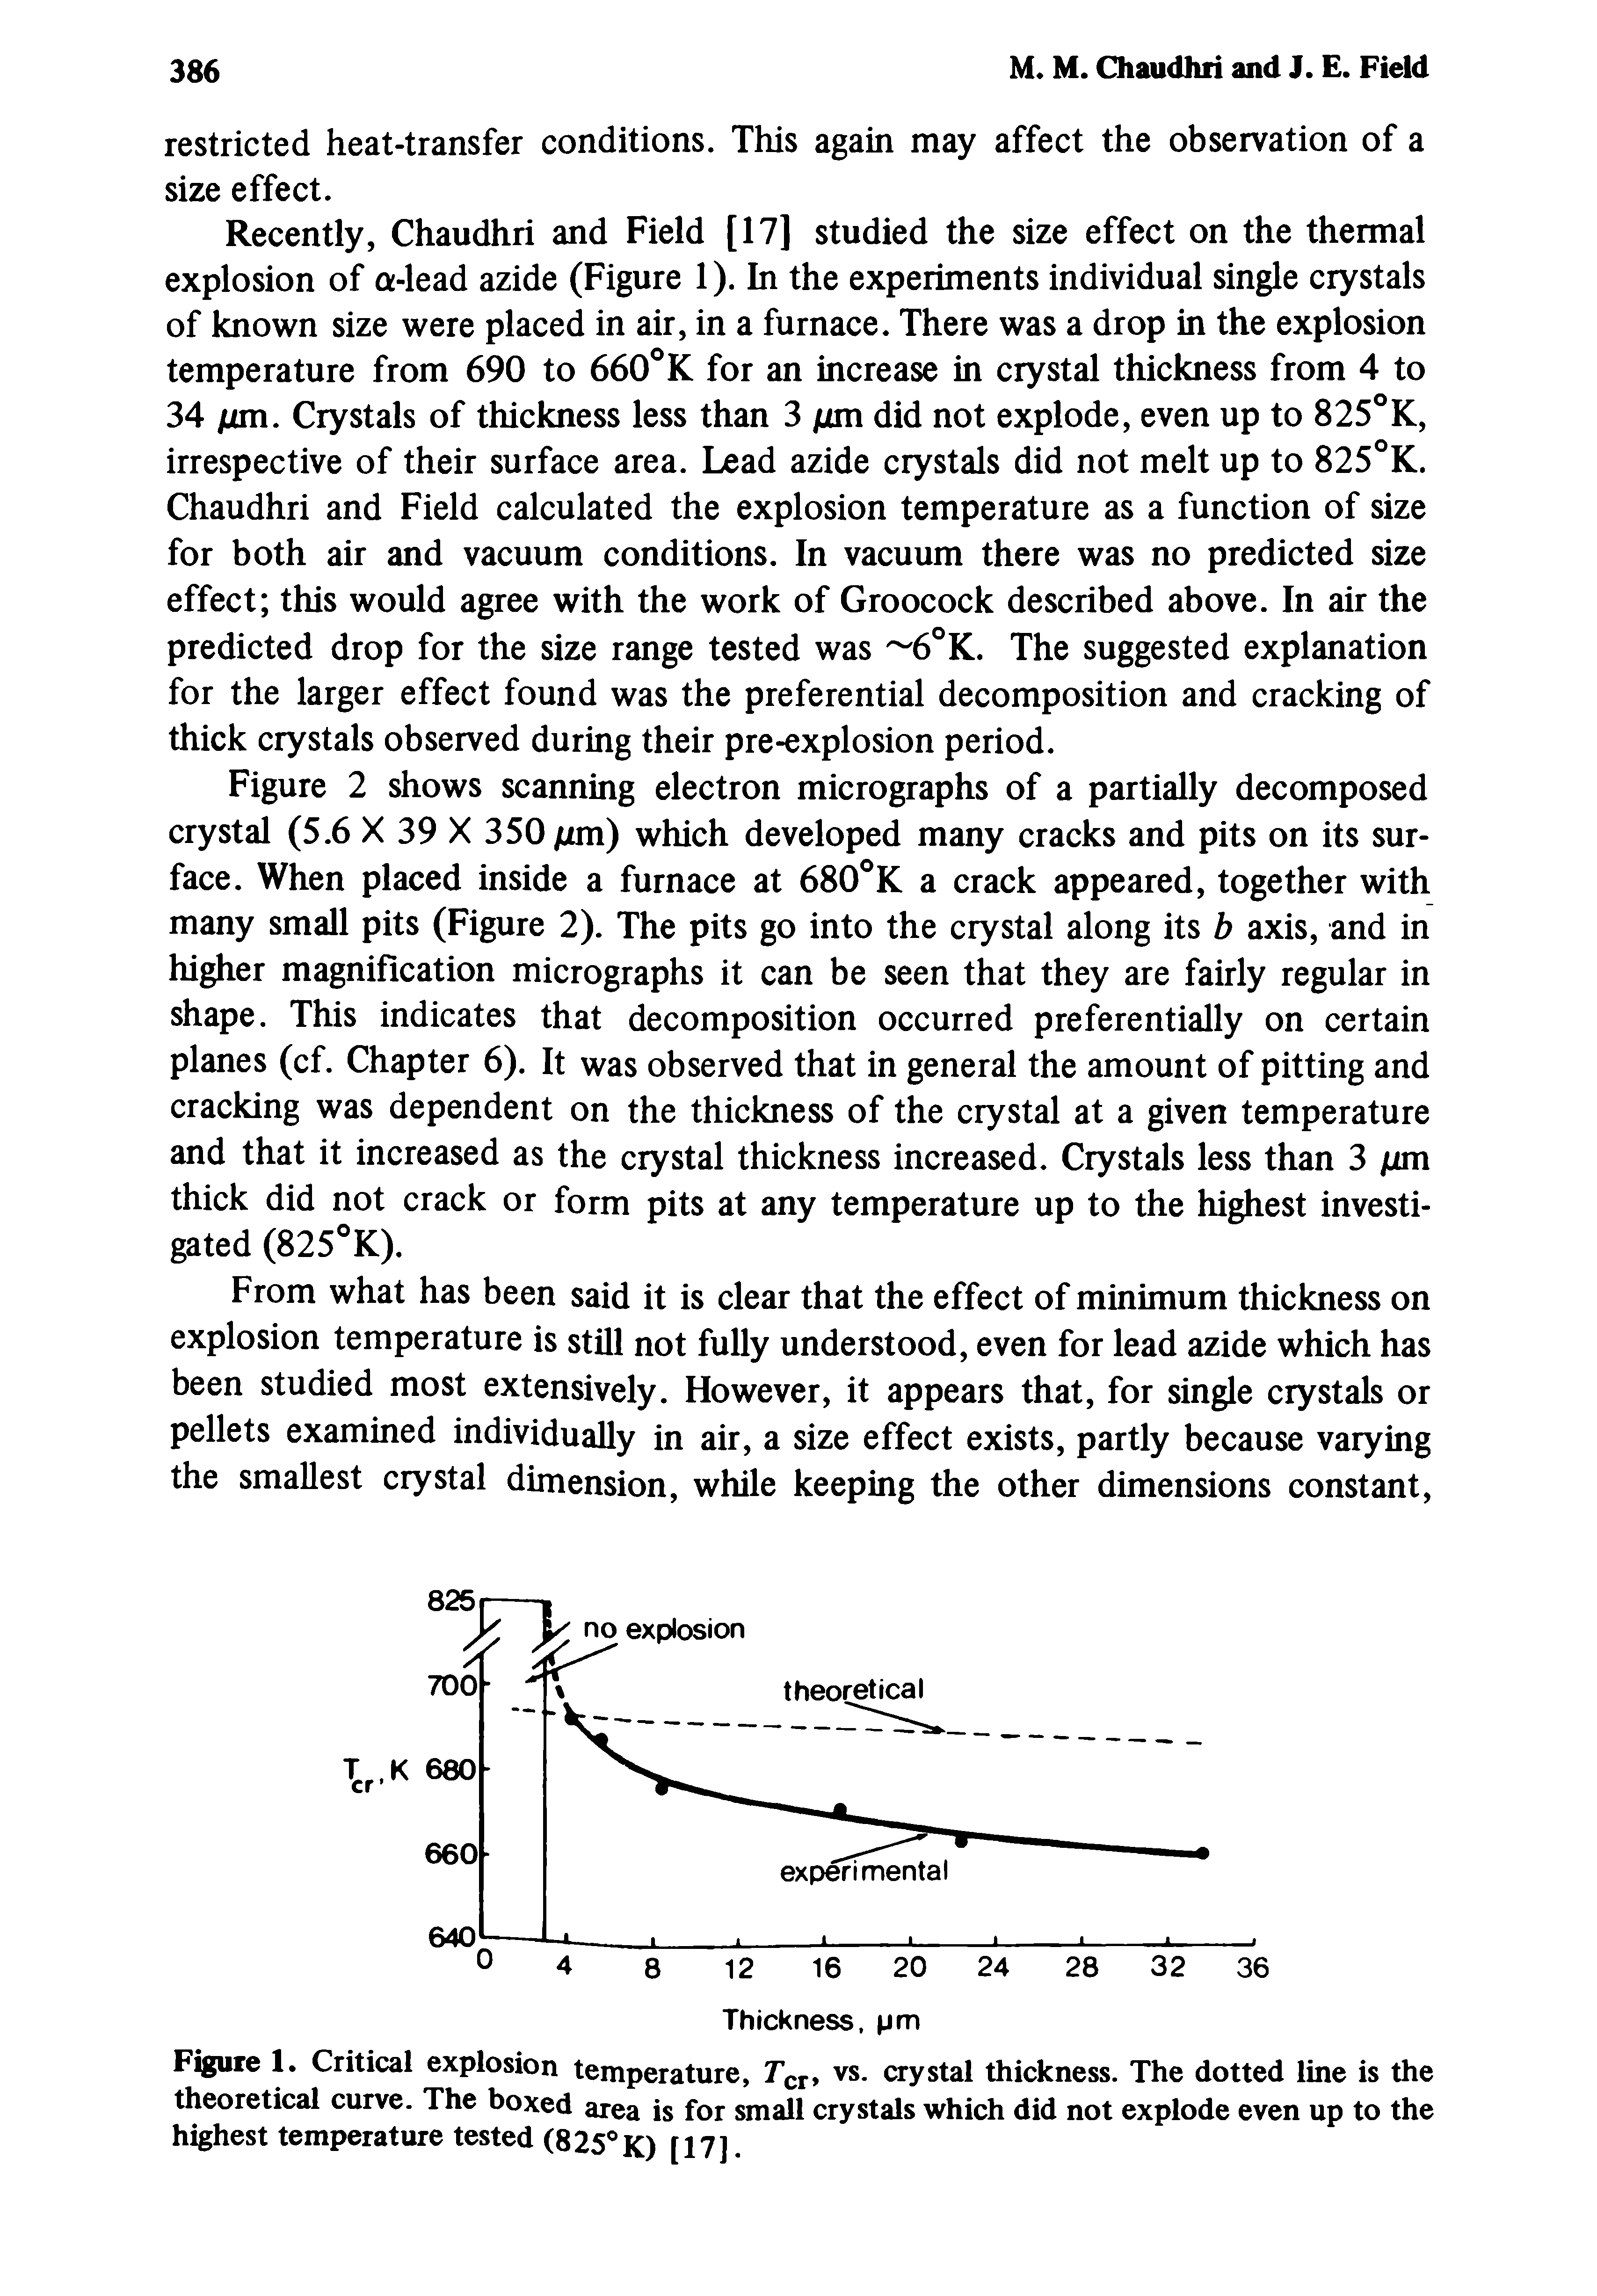 Figure 1. Critical explosion temperature, Tcr vs. crystal thickness. The dotted line is the theoretical curve. The boxed area is for small crystals which did not explode even up to the highest temperature tested (825 K) [17]...